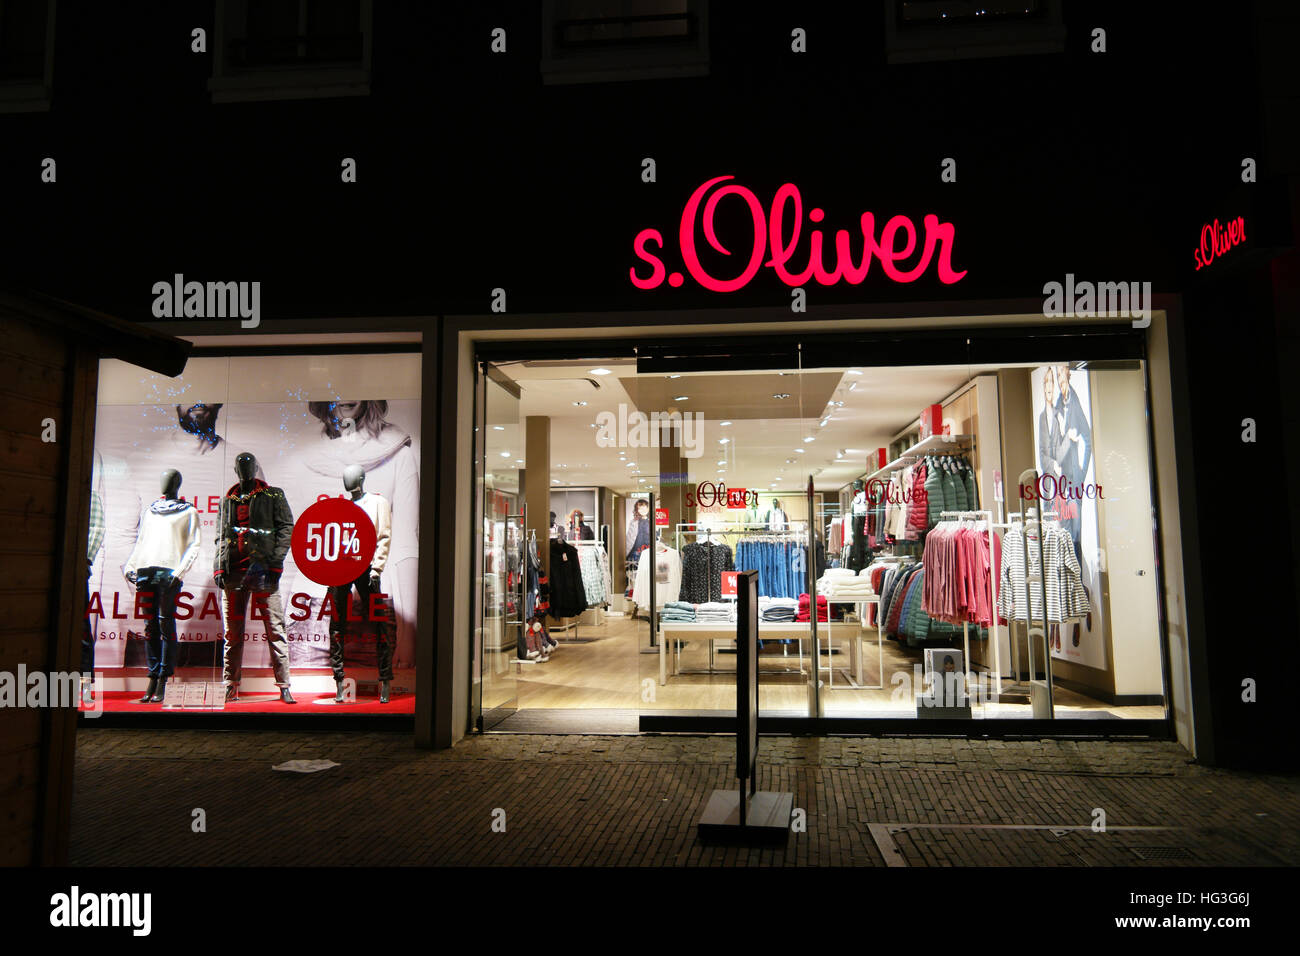 Branch of s.Oliver fashion store Stock Photo